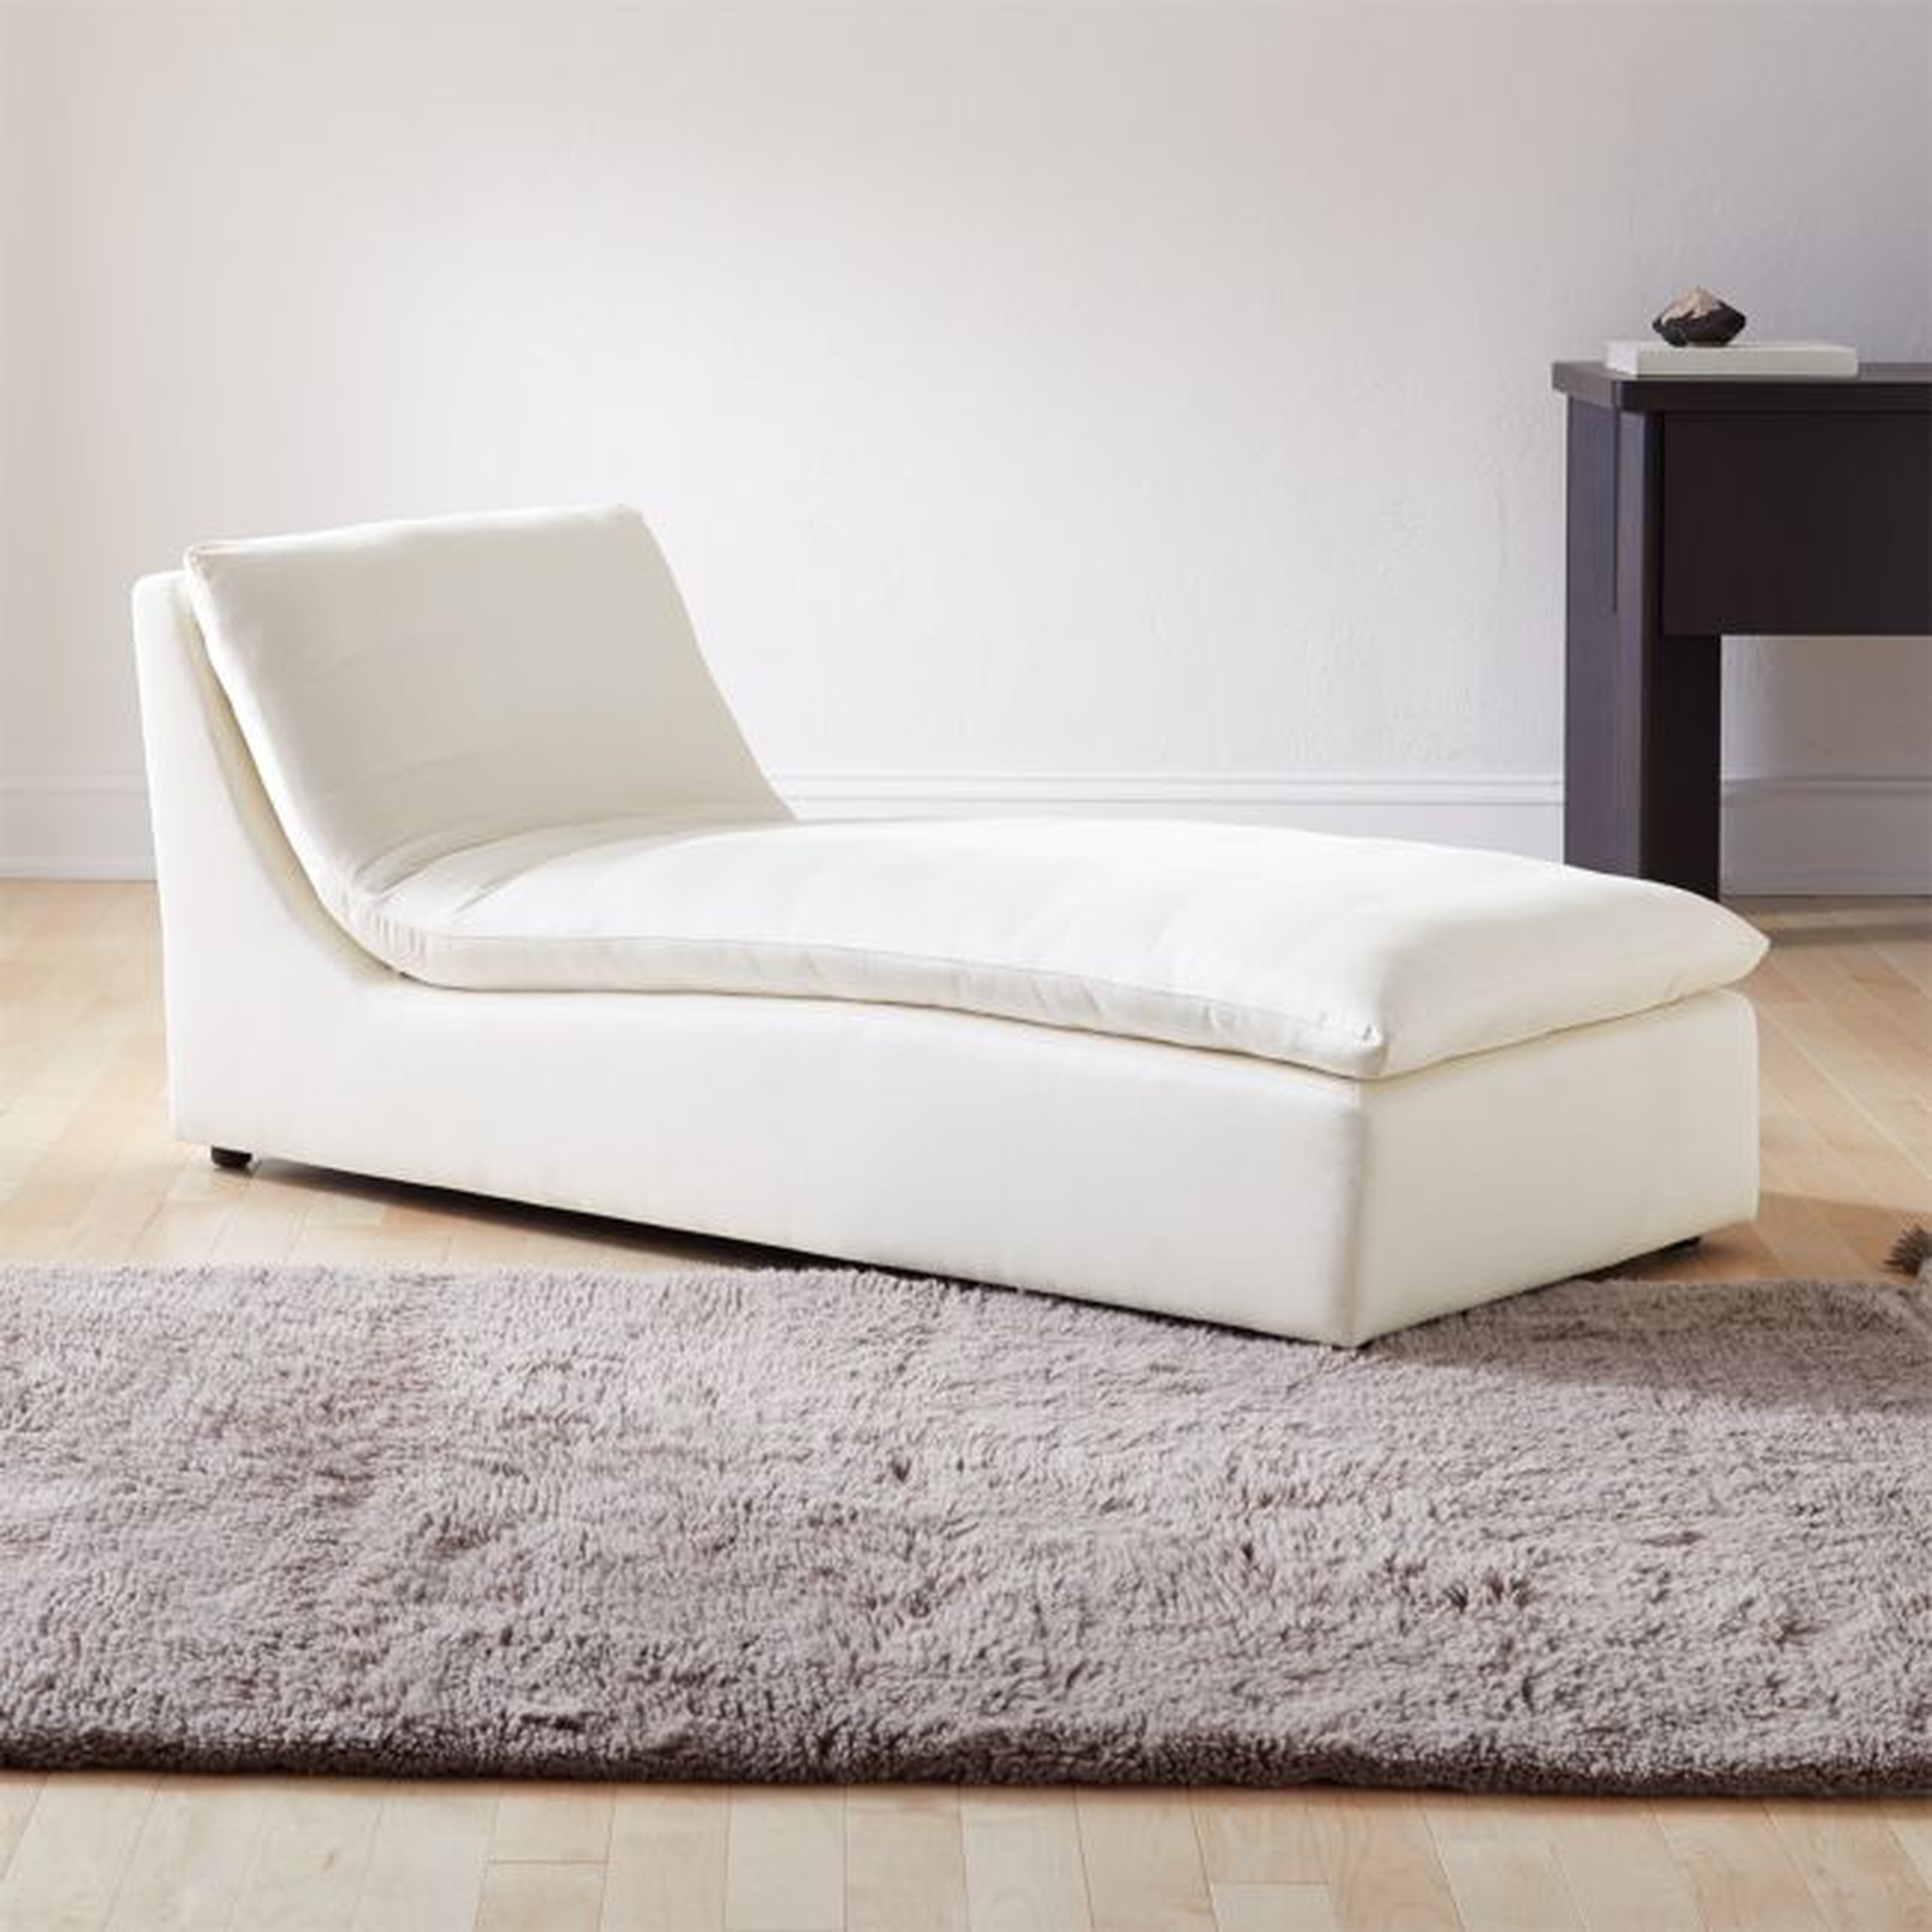 Turn Ivory Chaise Lounge - CB2